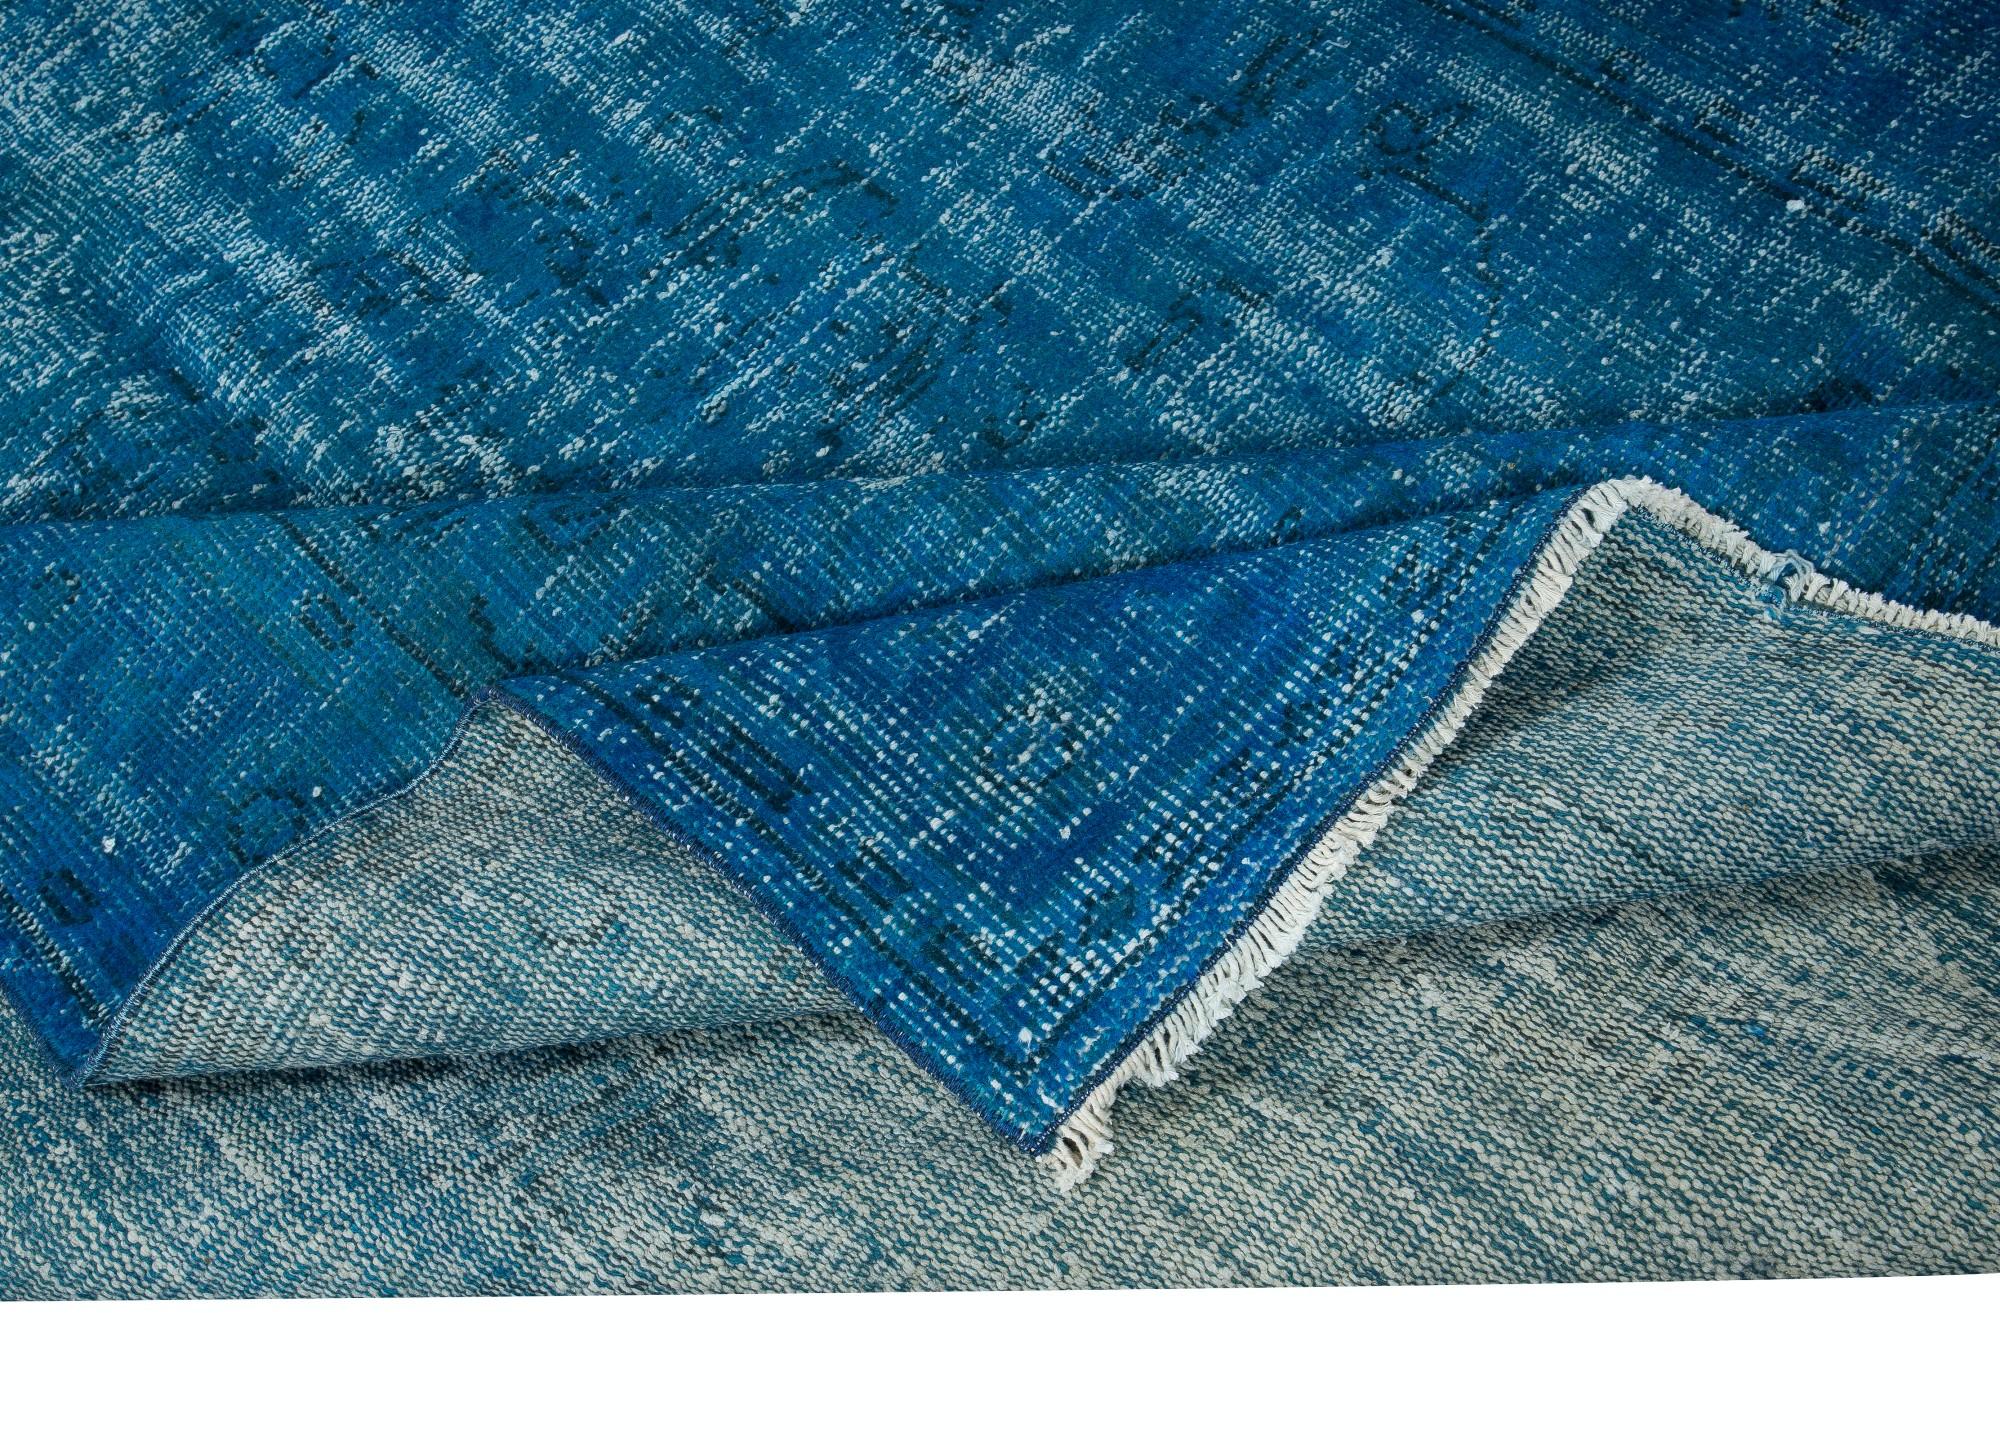 Hand-Knotted 5.8x8.6 Ft Overdyed Blue Area Rug, Handmade in Turkey, Modern Upcycled Carpet For Sale